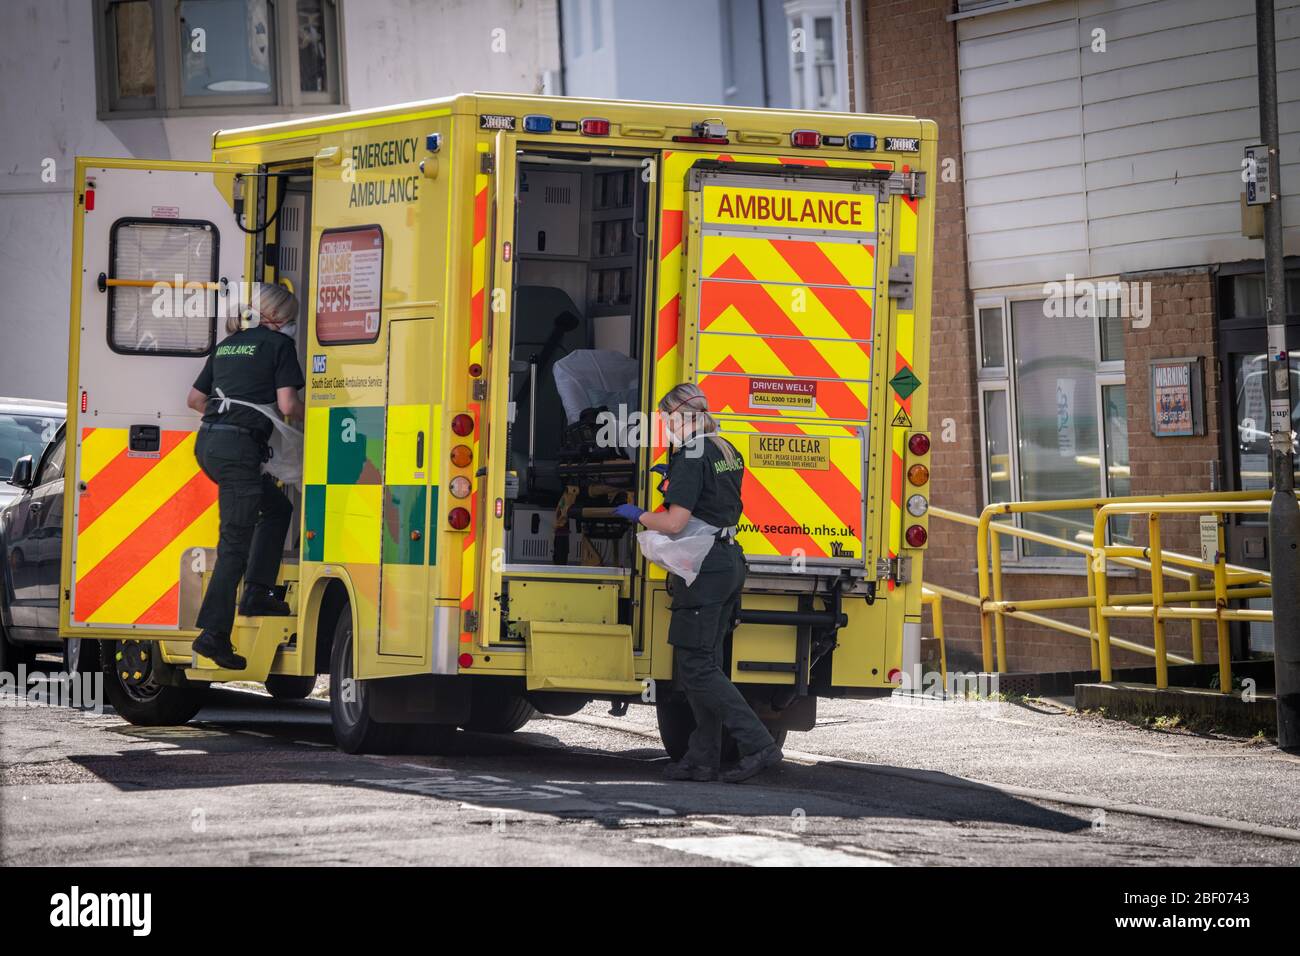 Ambulance crew in full PPE prepare to enter a block of sheltered accommodation flats, central Brighton, East Sussex, UK Stock Photo